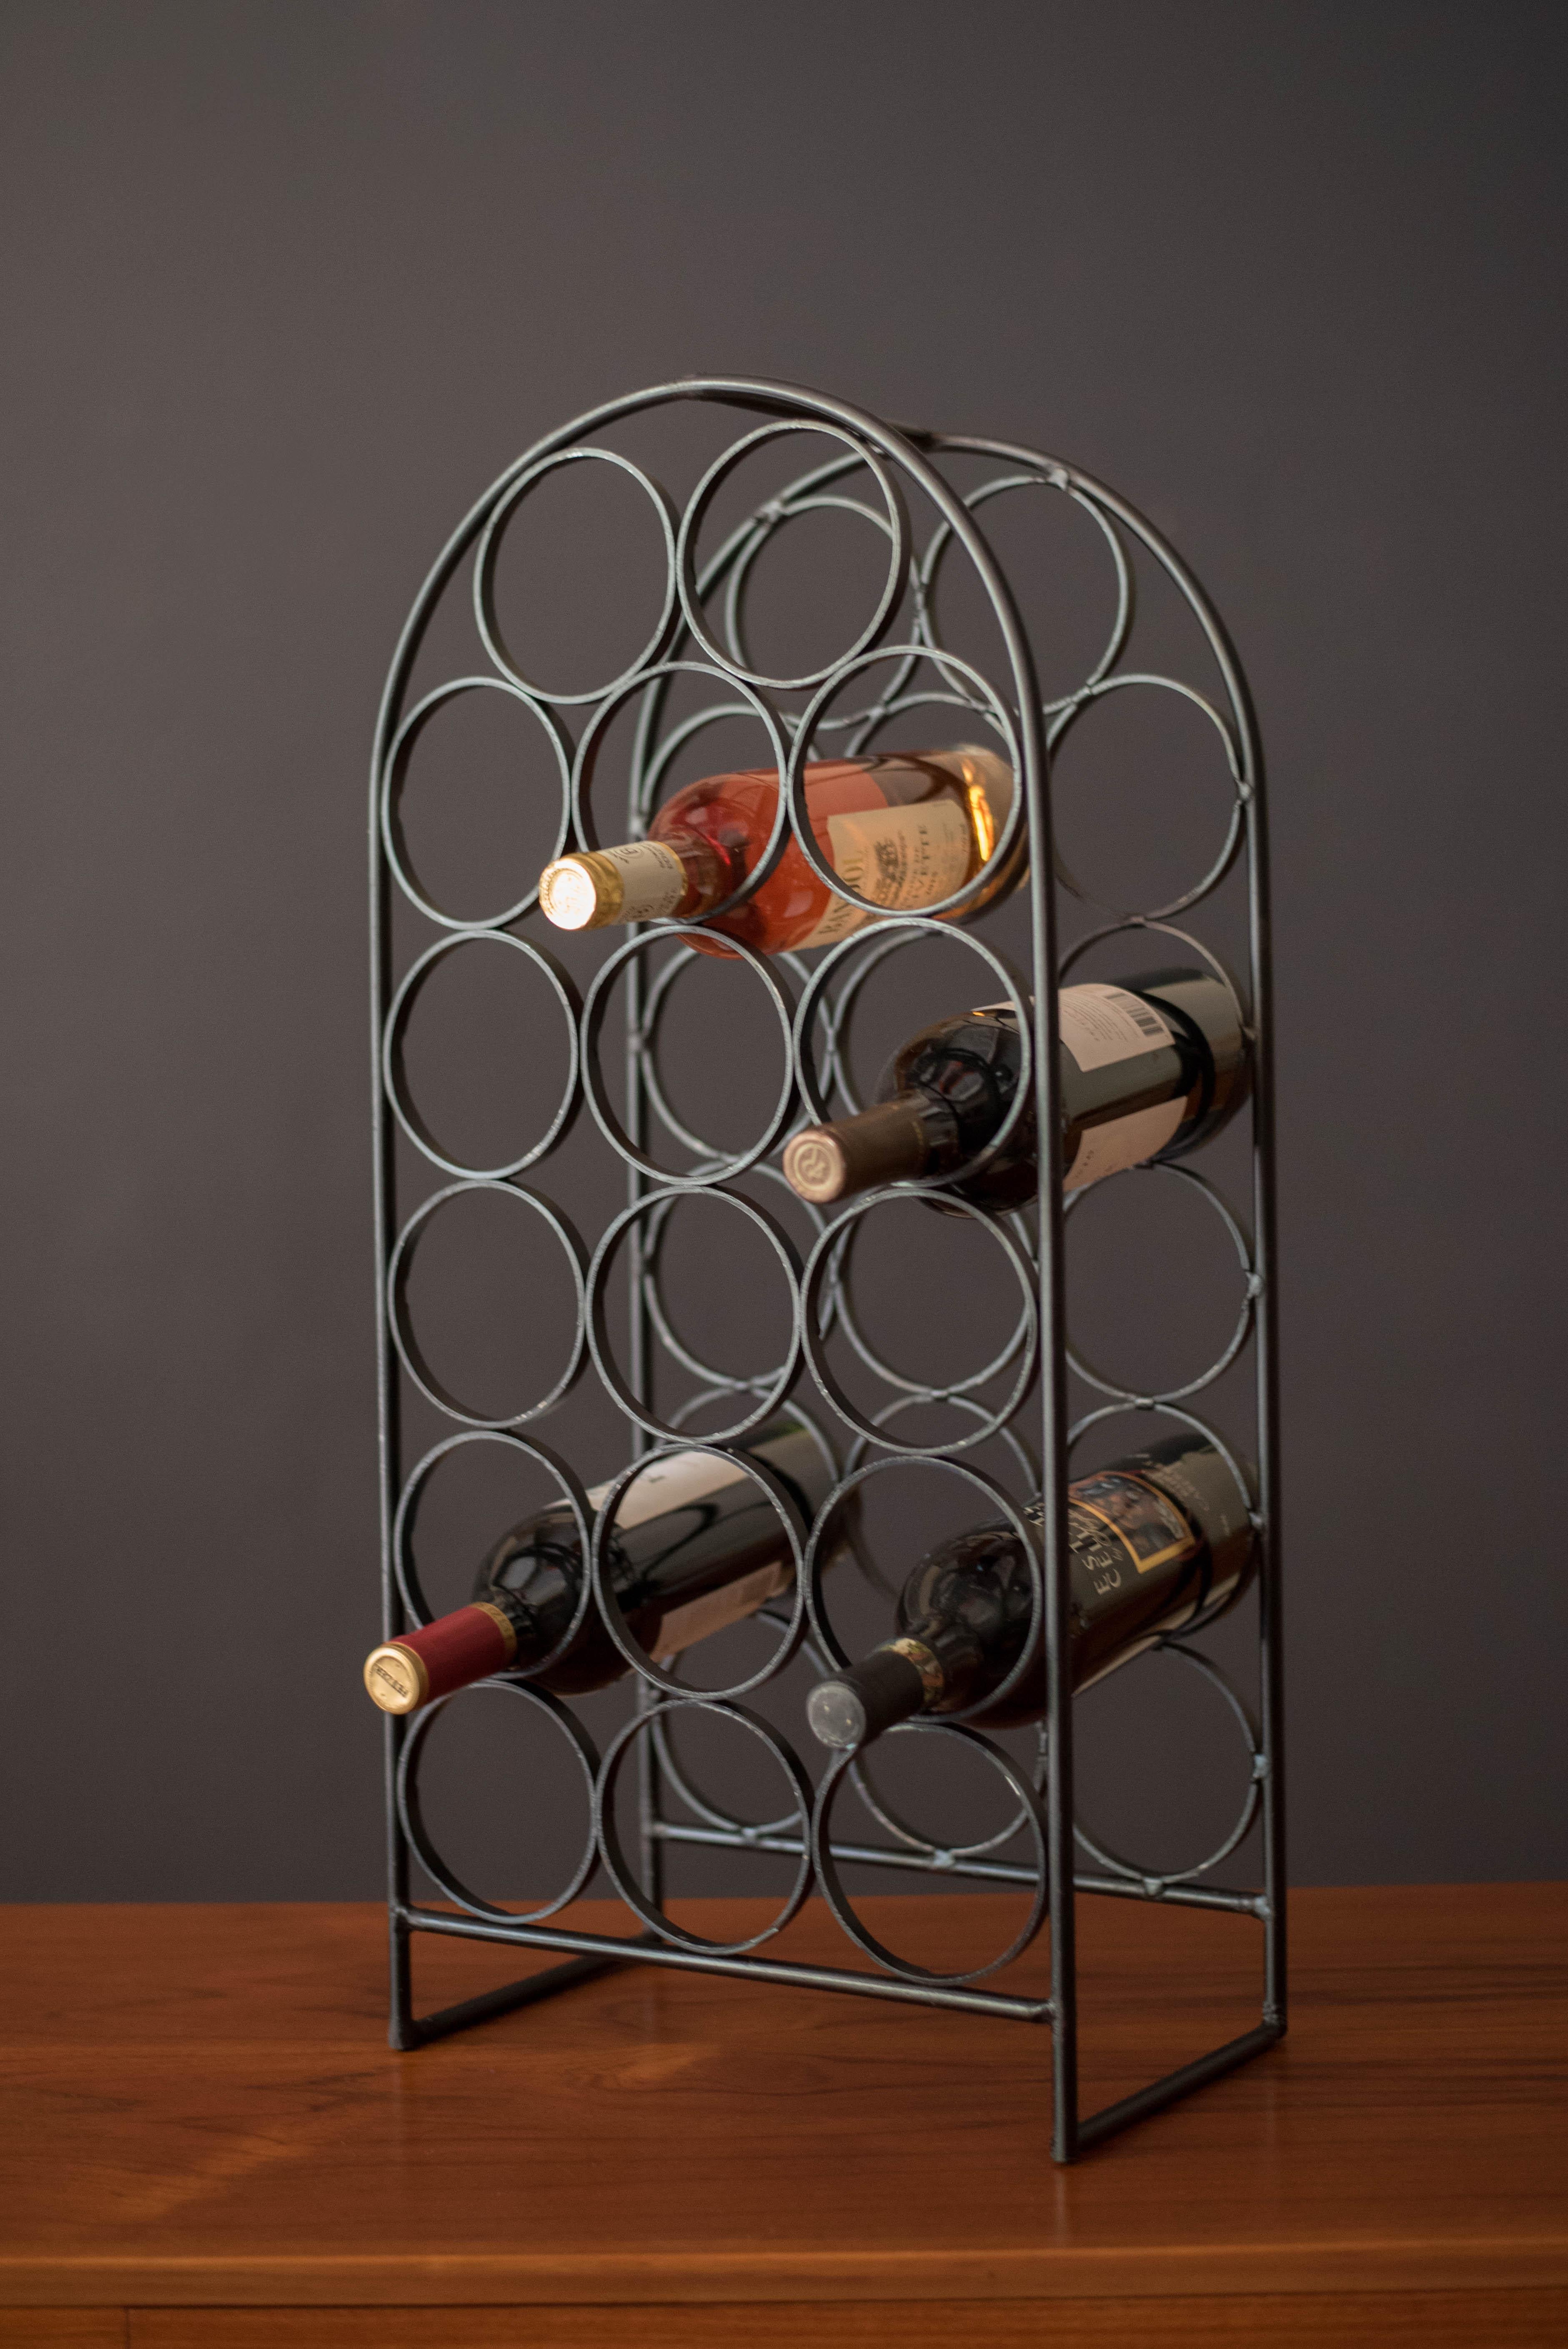 Vintage heavy cast iron wine rack designed by Arthur Umanoff for Shaver Howard, circa 1950's. This piece accommodates up to 17 bottles with plenty of vintage patina. A great accessory for any modern decor collection. 
 

